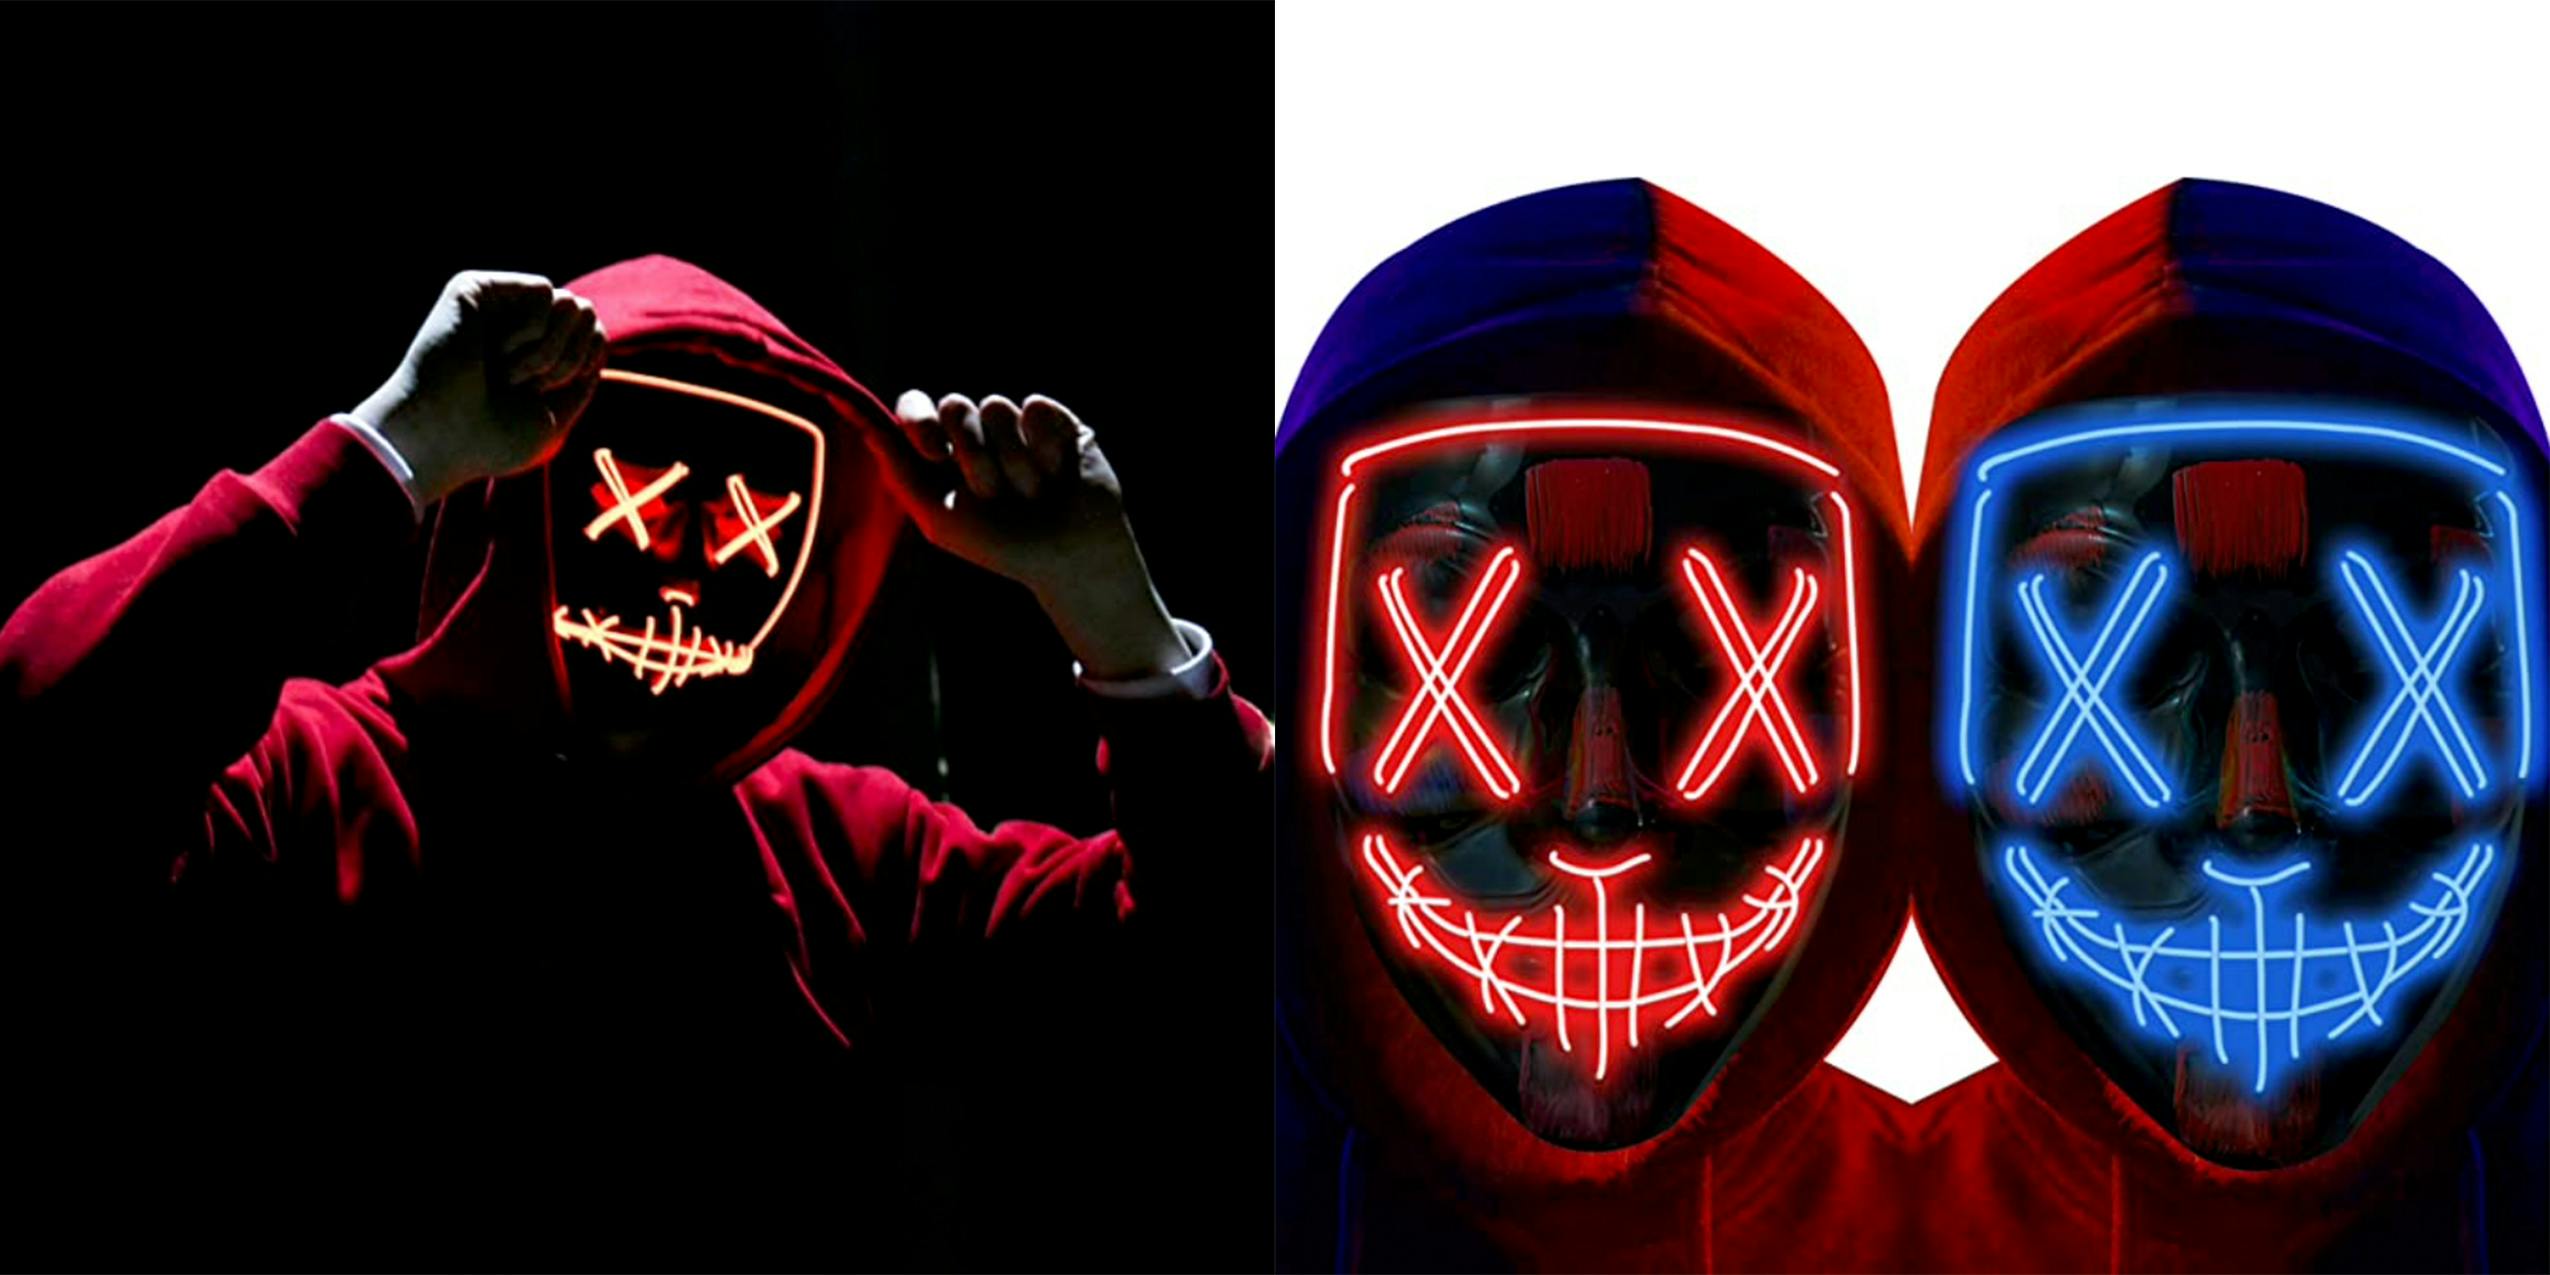 Man wearing a hoodie and a light up LED mask.